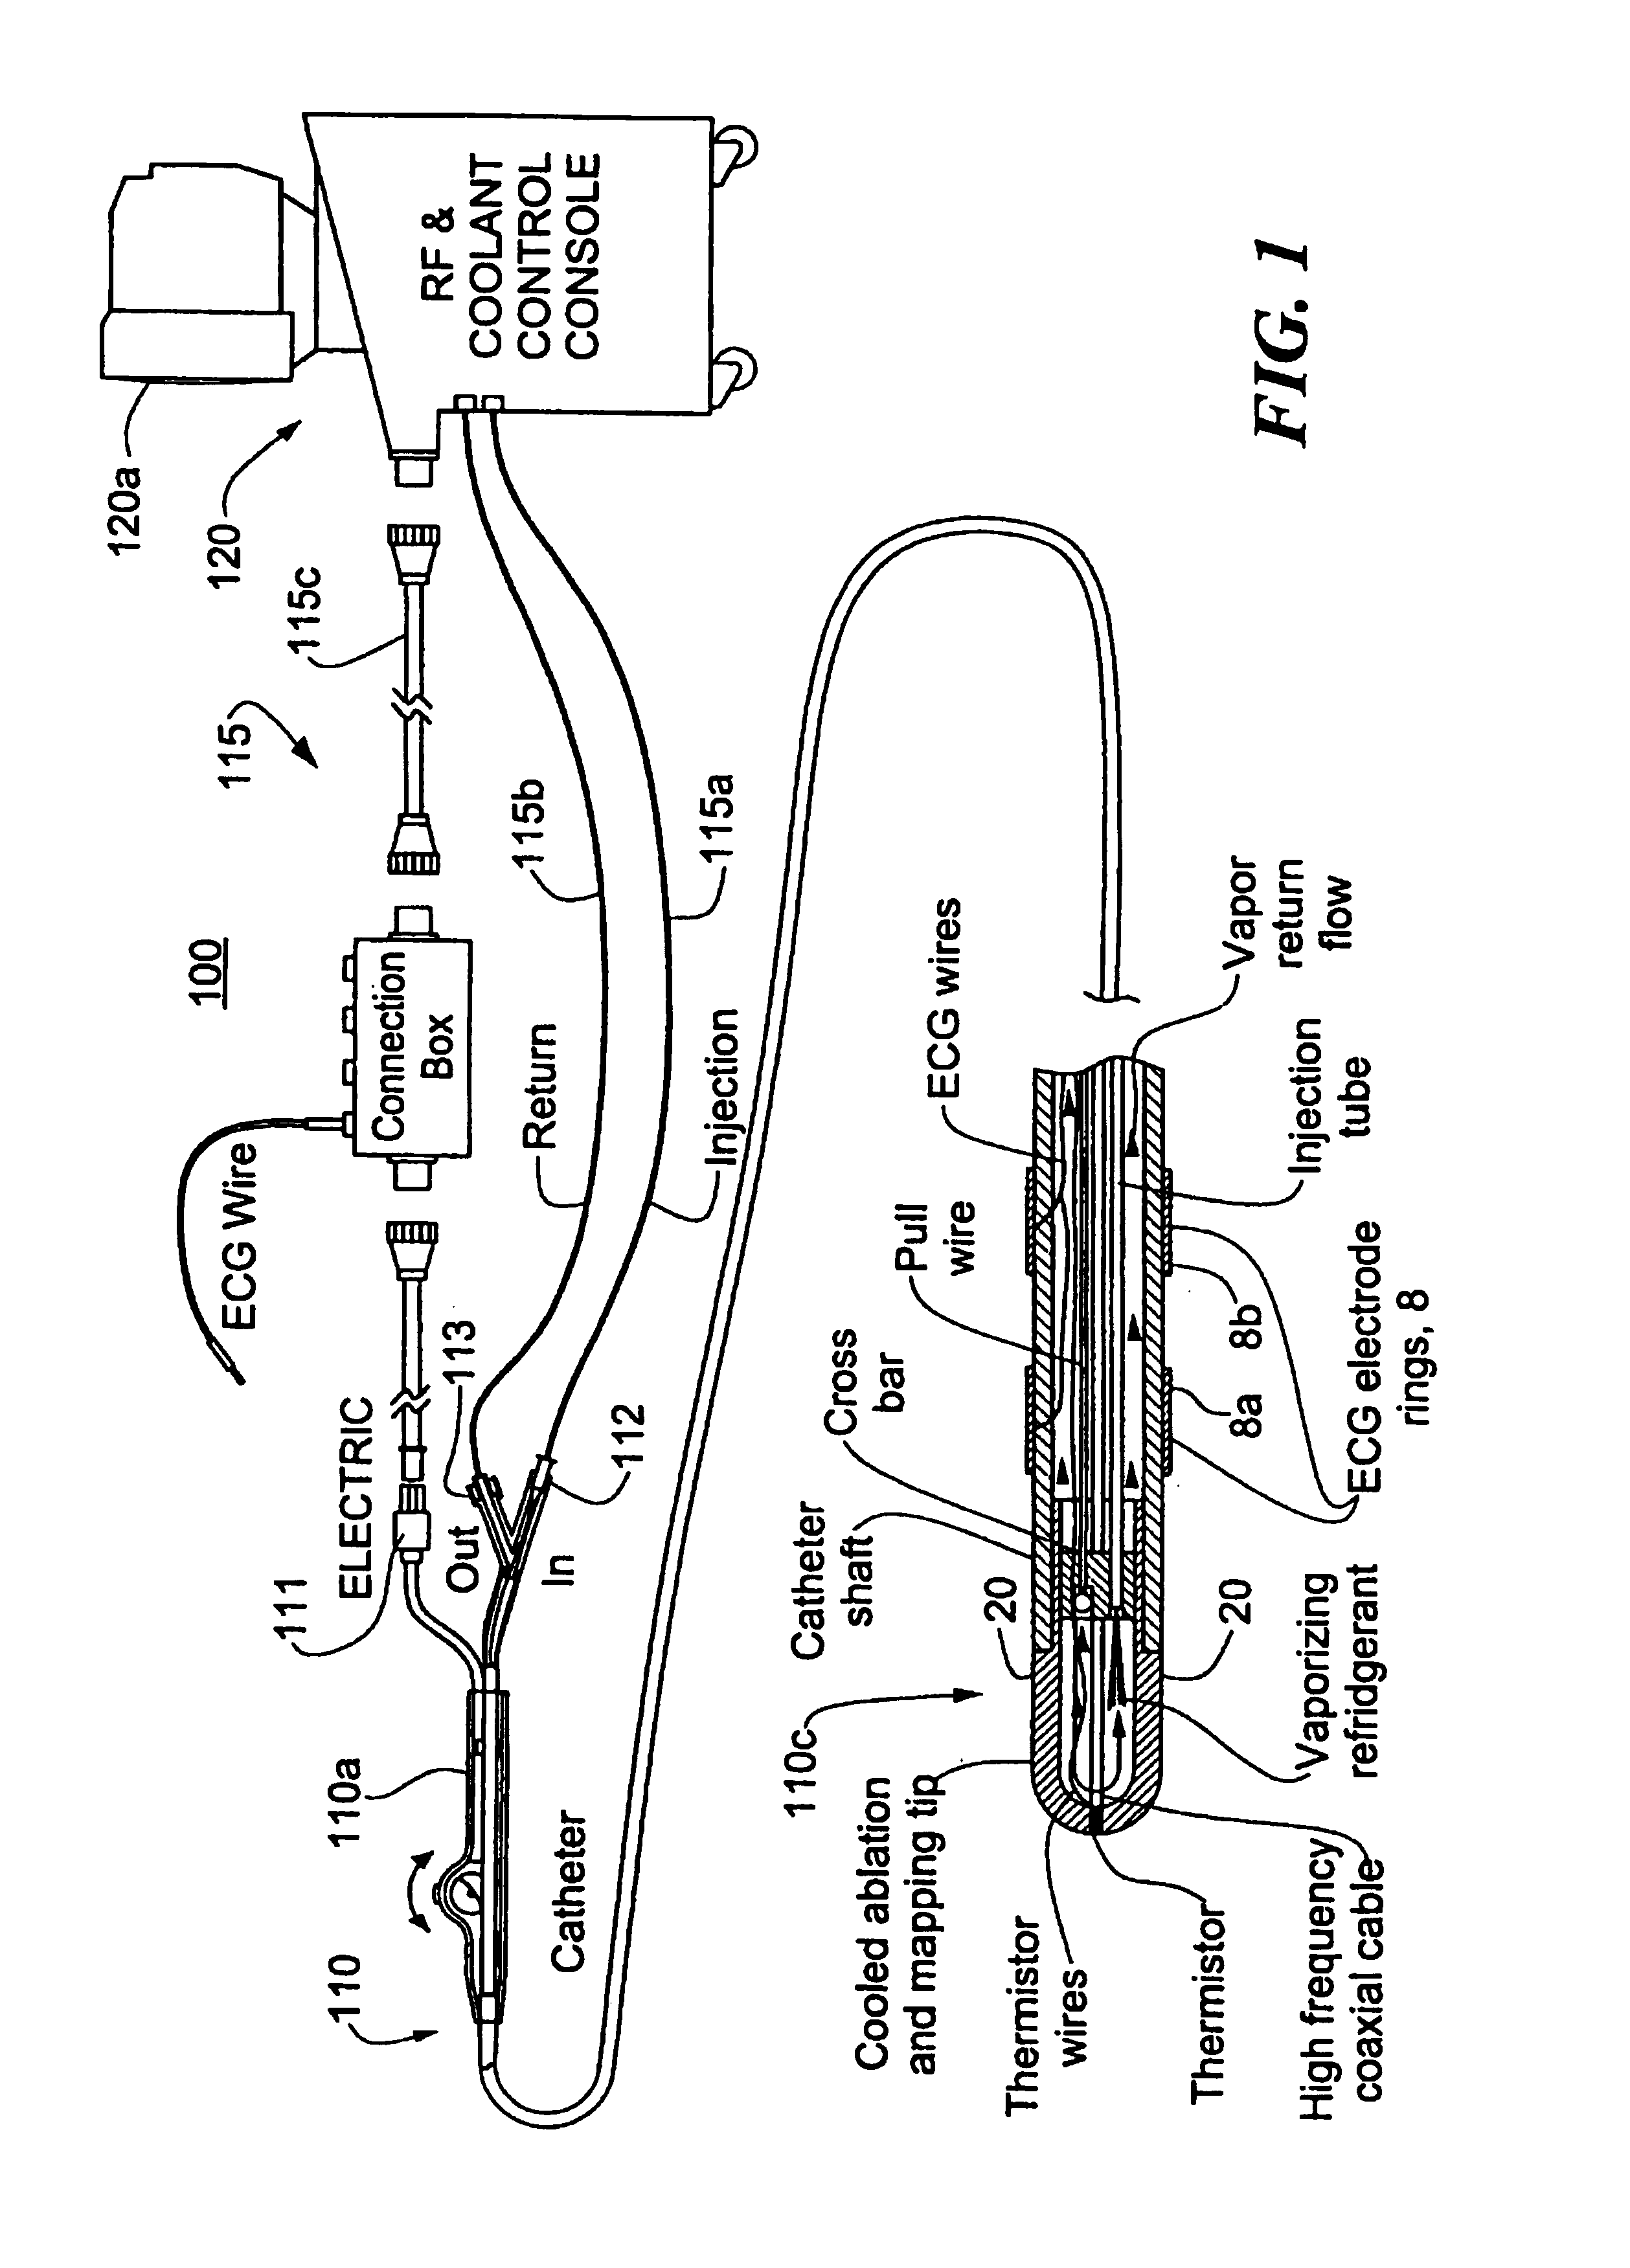 Catheter with cryogenic and heating ablation